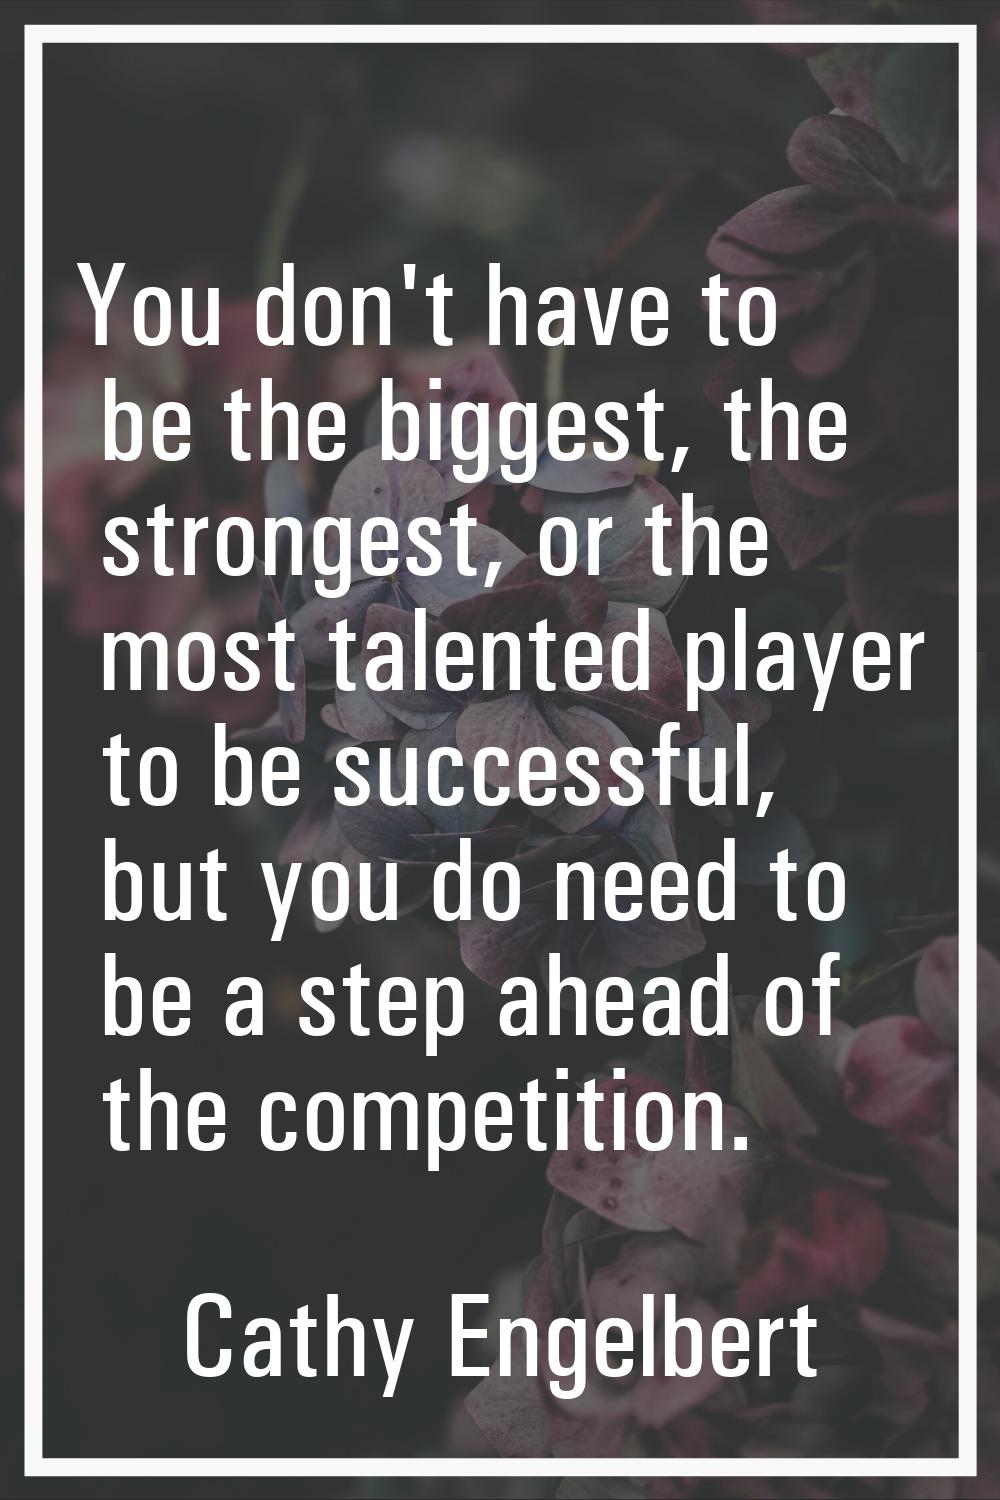 You don't have to be the biggest, the strongest, or the most talented player to be successful, but 